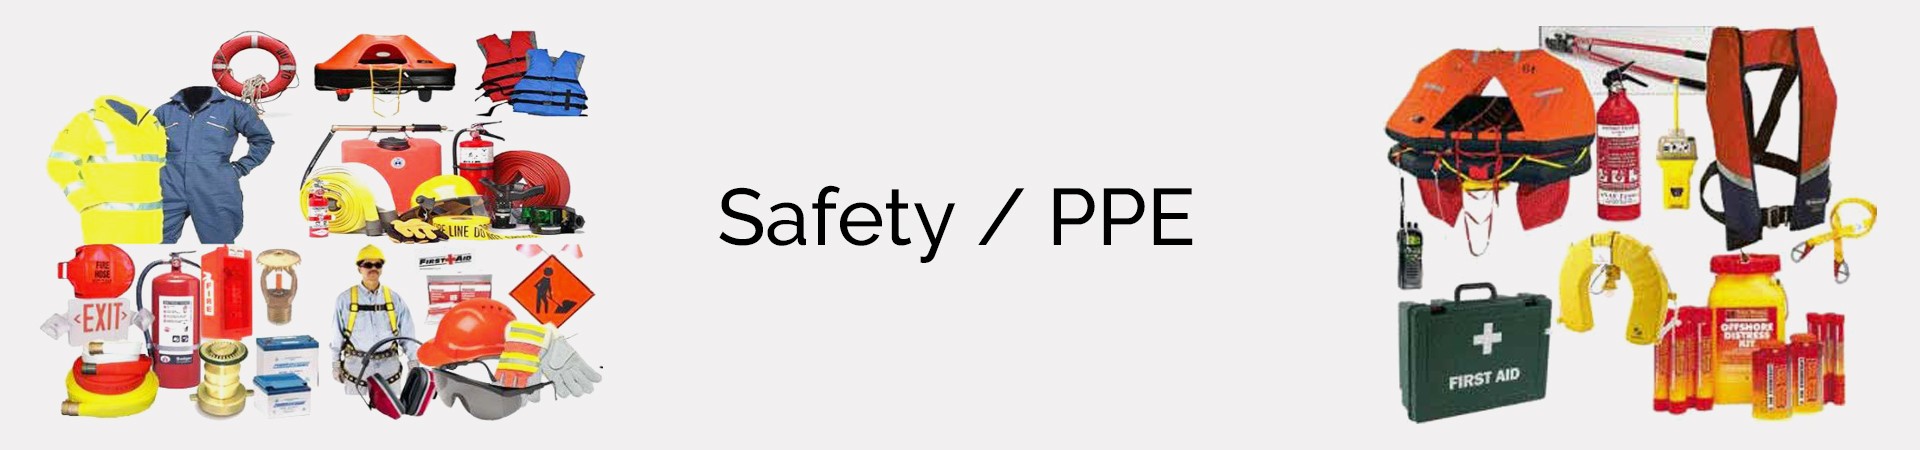 Safety / PPE